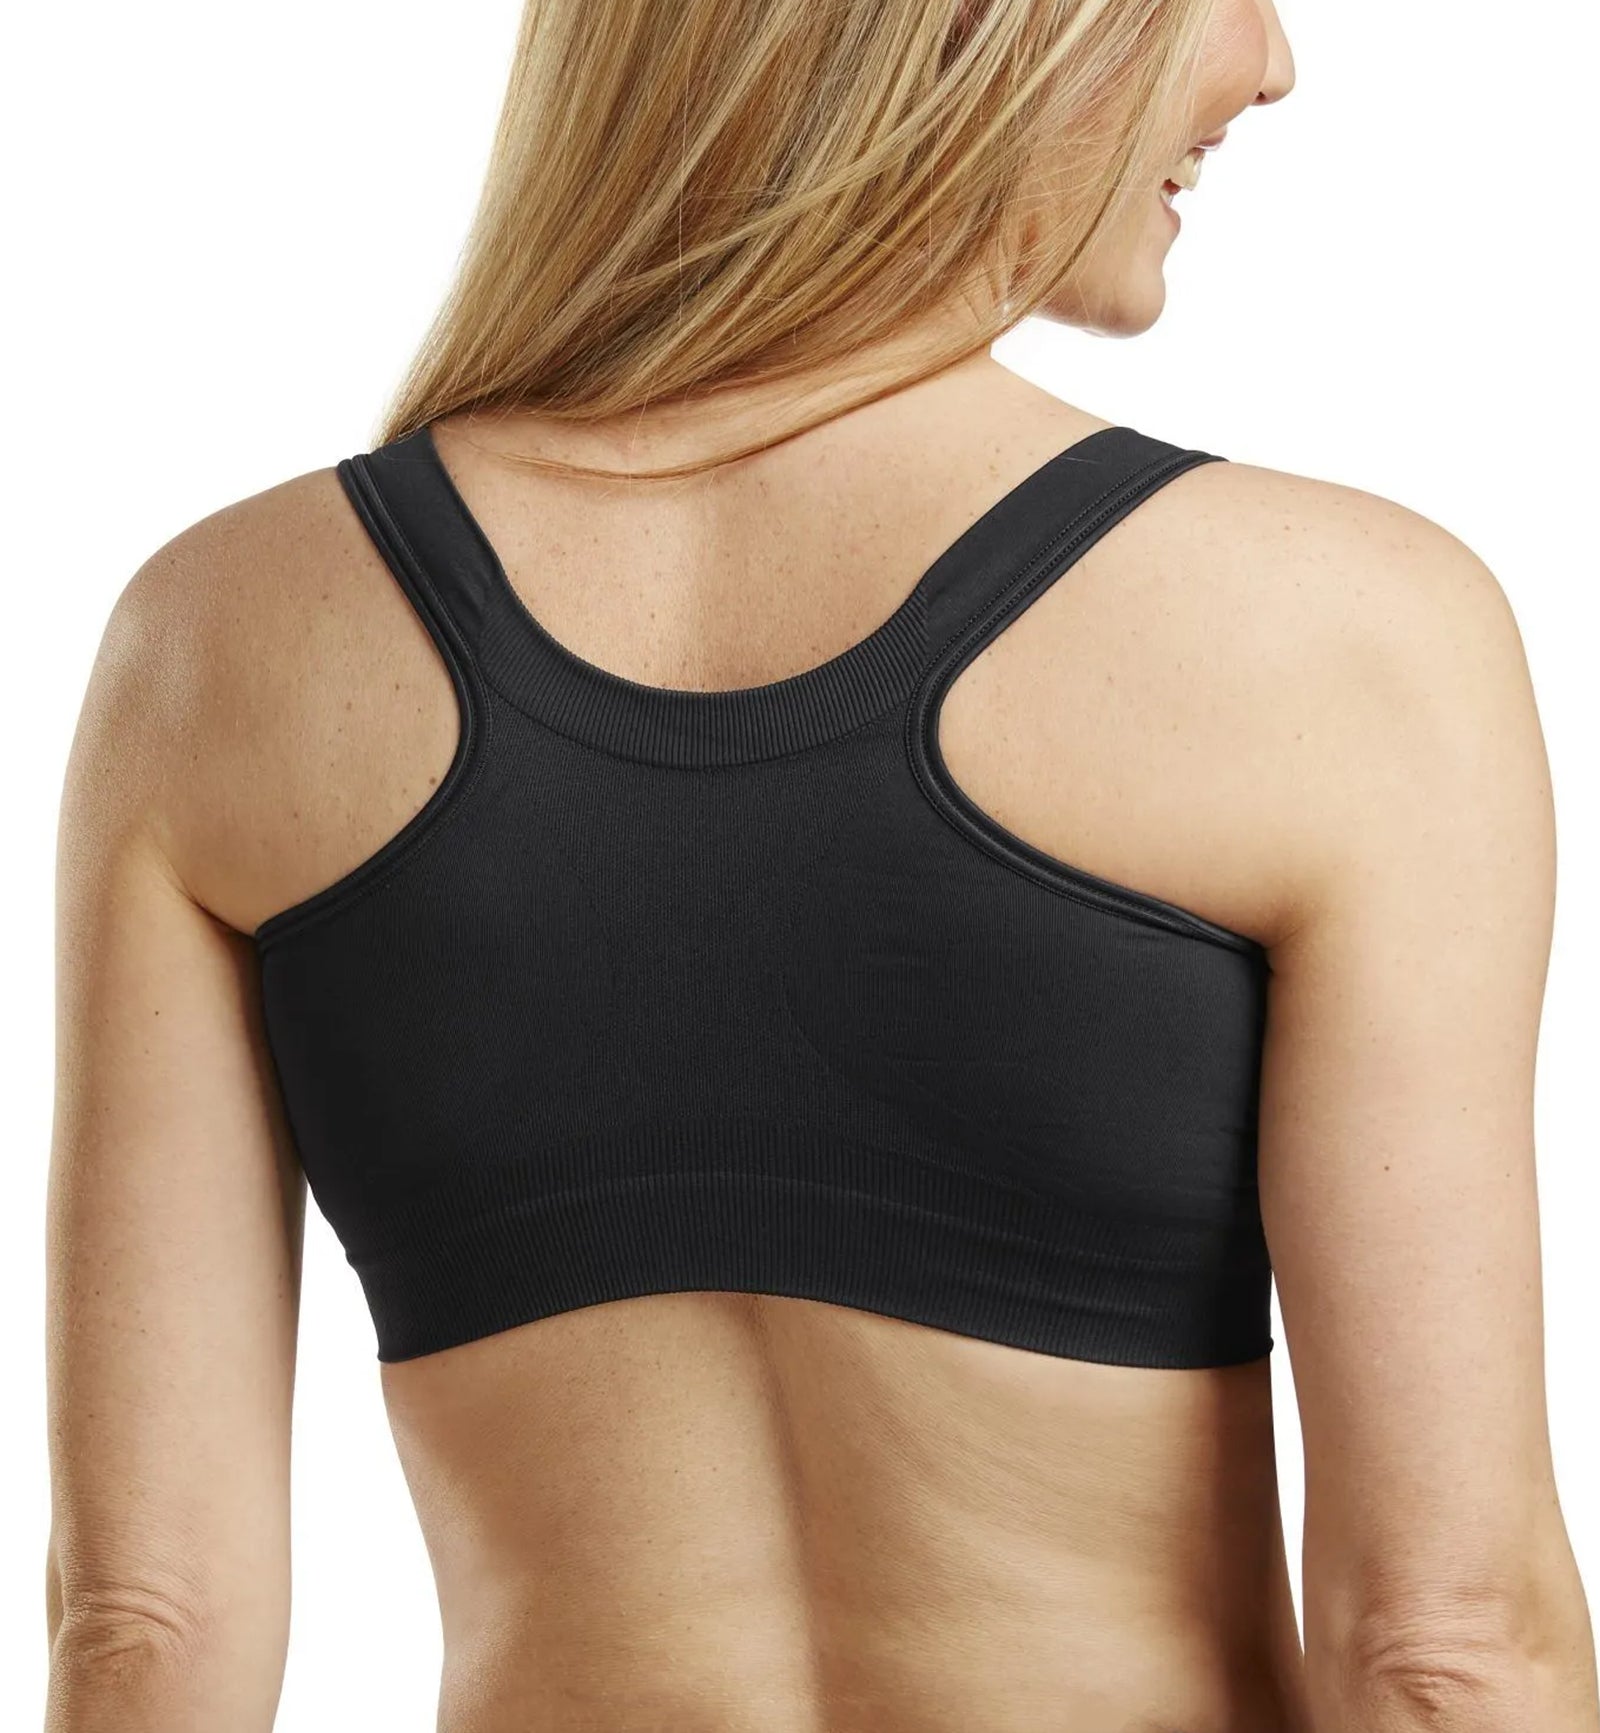 Introducing the first of our Carefix bra rangeAlice post-op bra